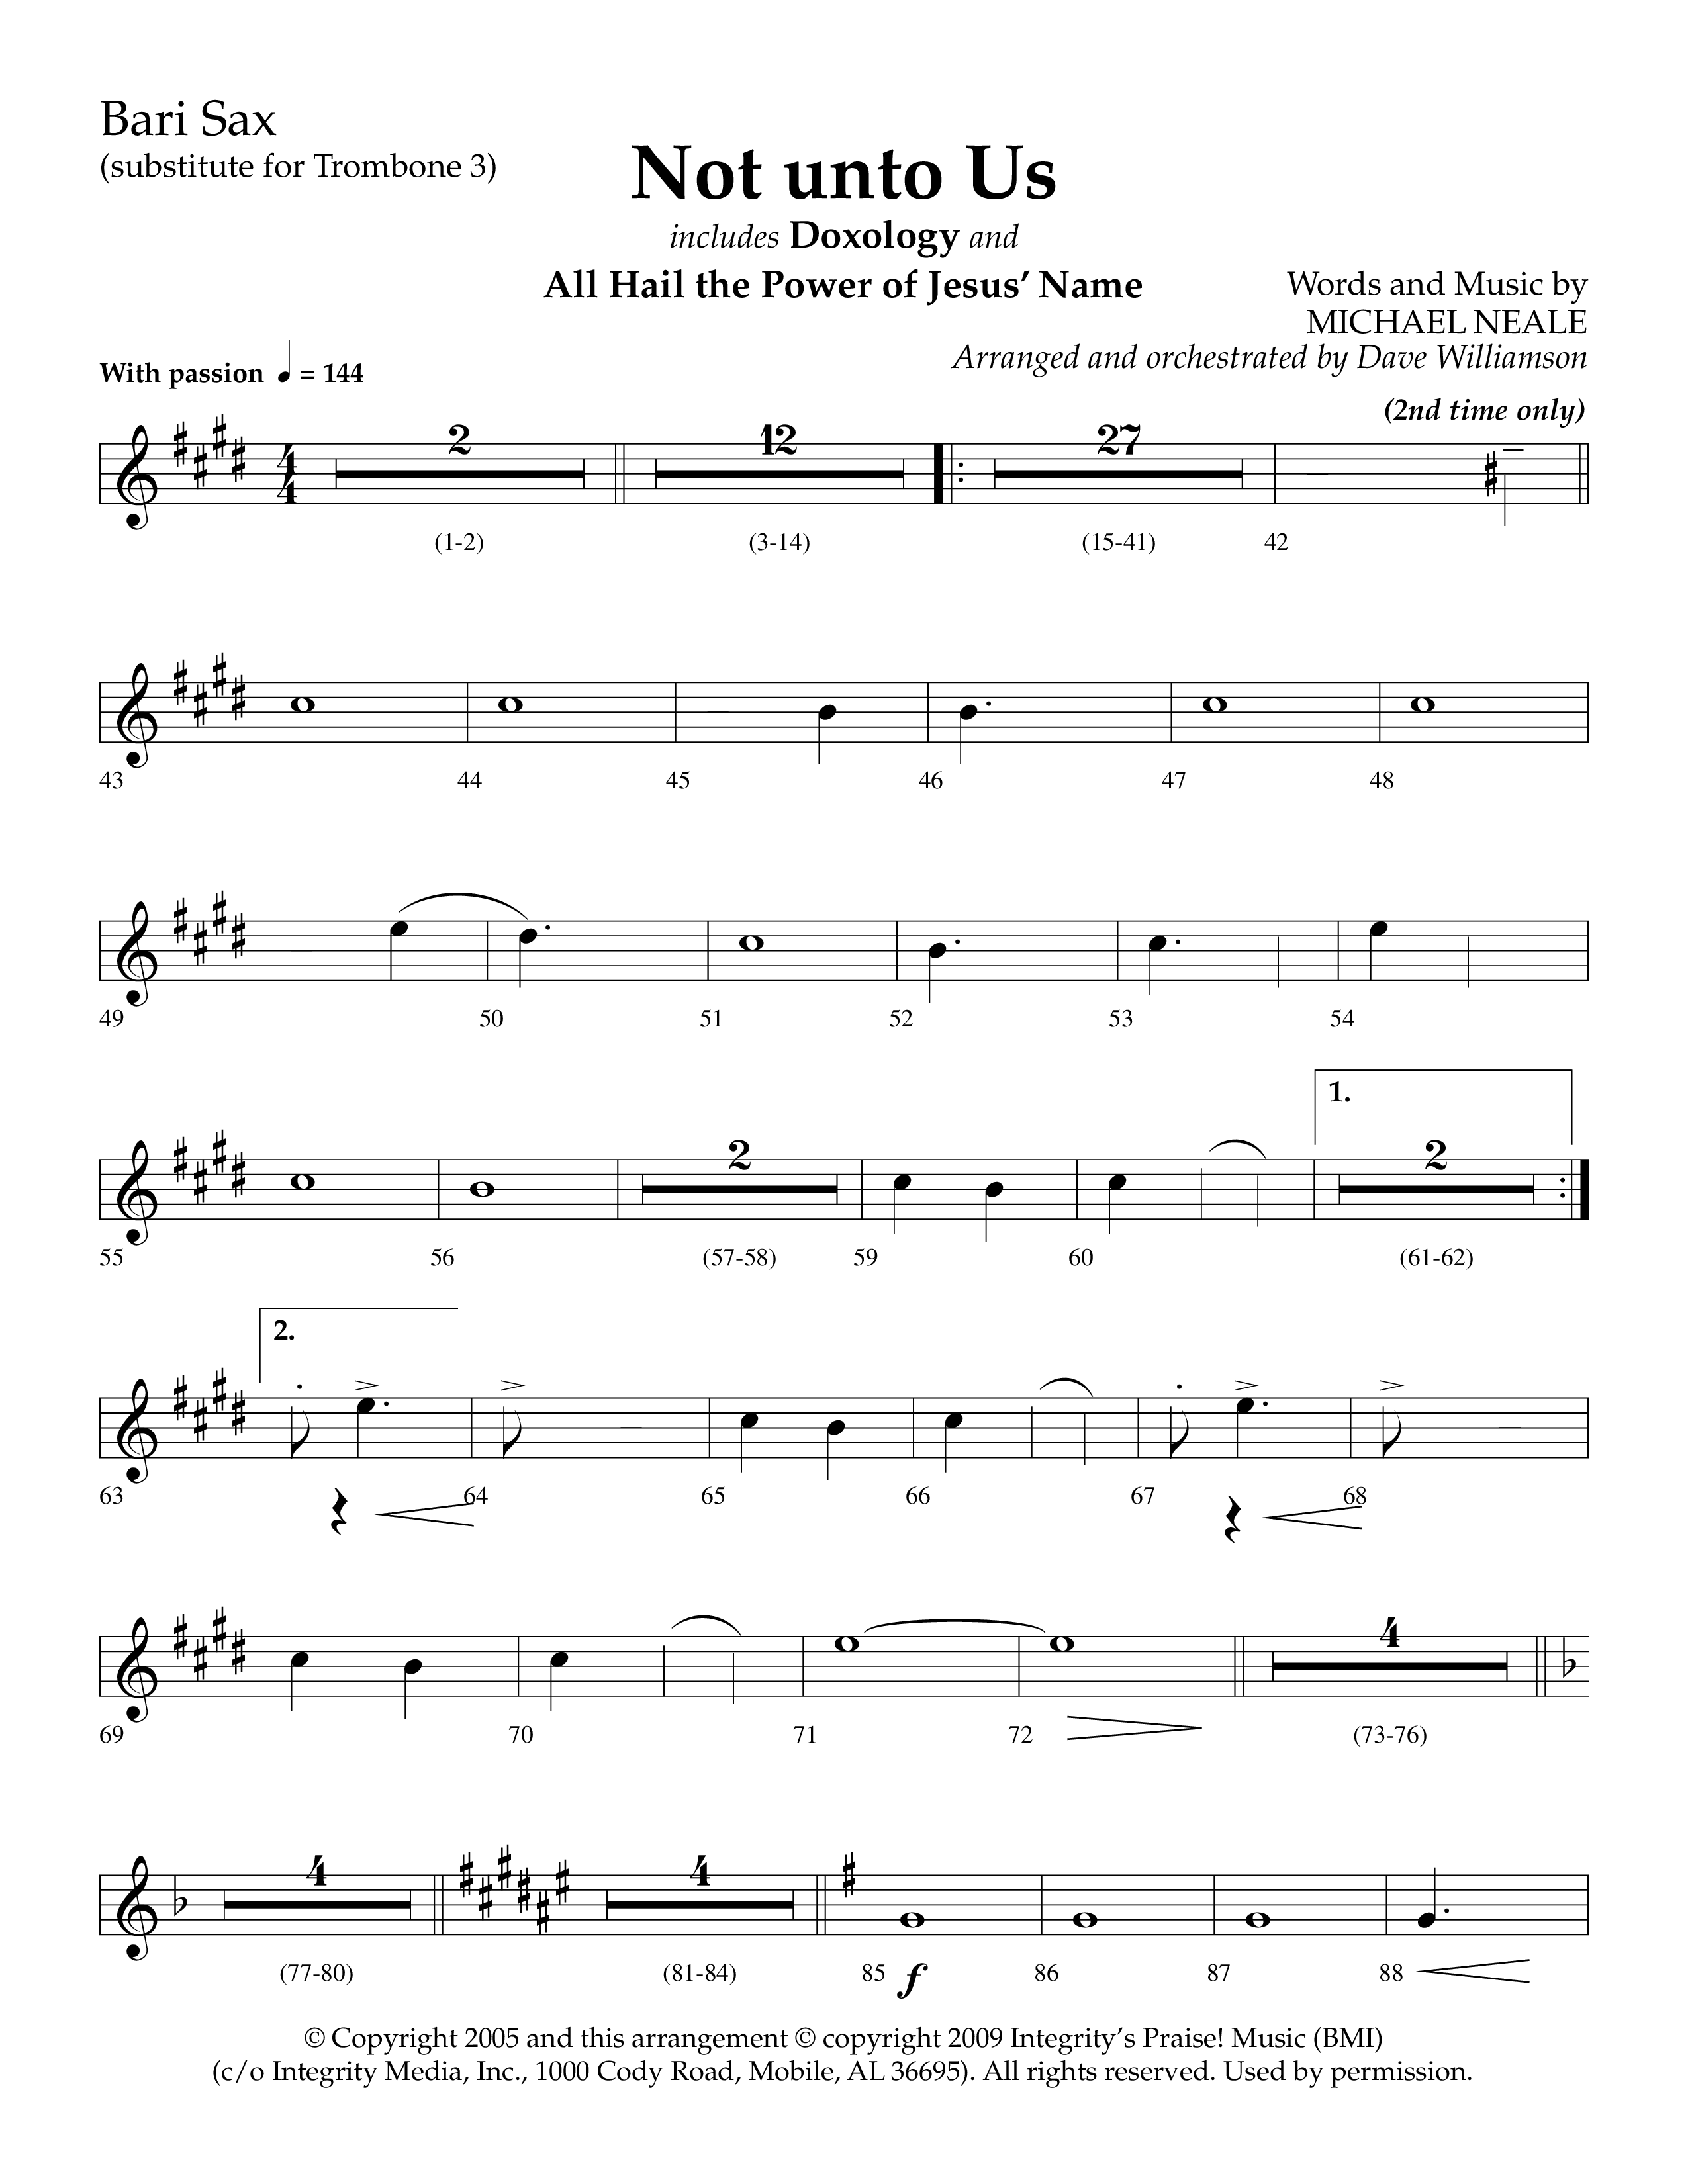 Not Unto Us (with Doxology, All Hail The Power Of Jesus Name) (Choral Anthem SATB) Bari Sax (Lifeway Choral / Arr. Dave Williamson)